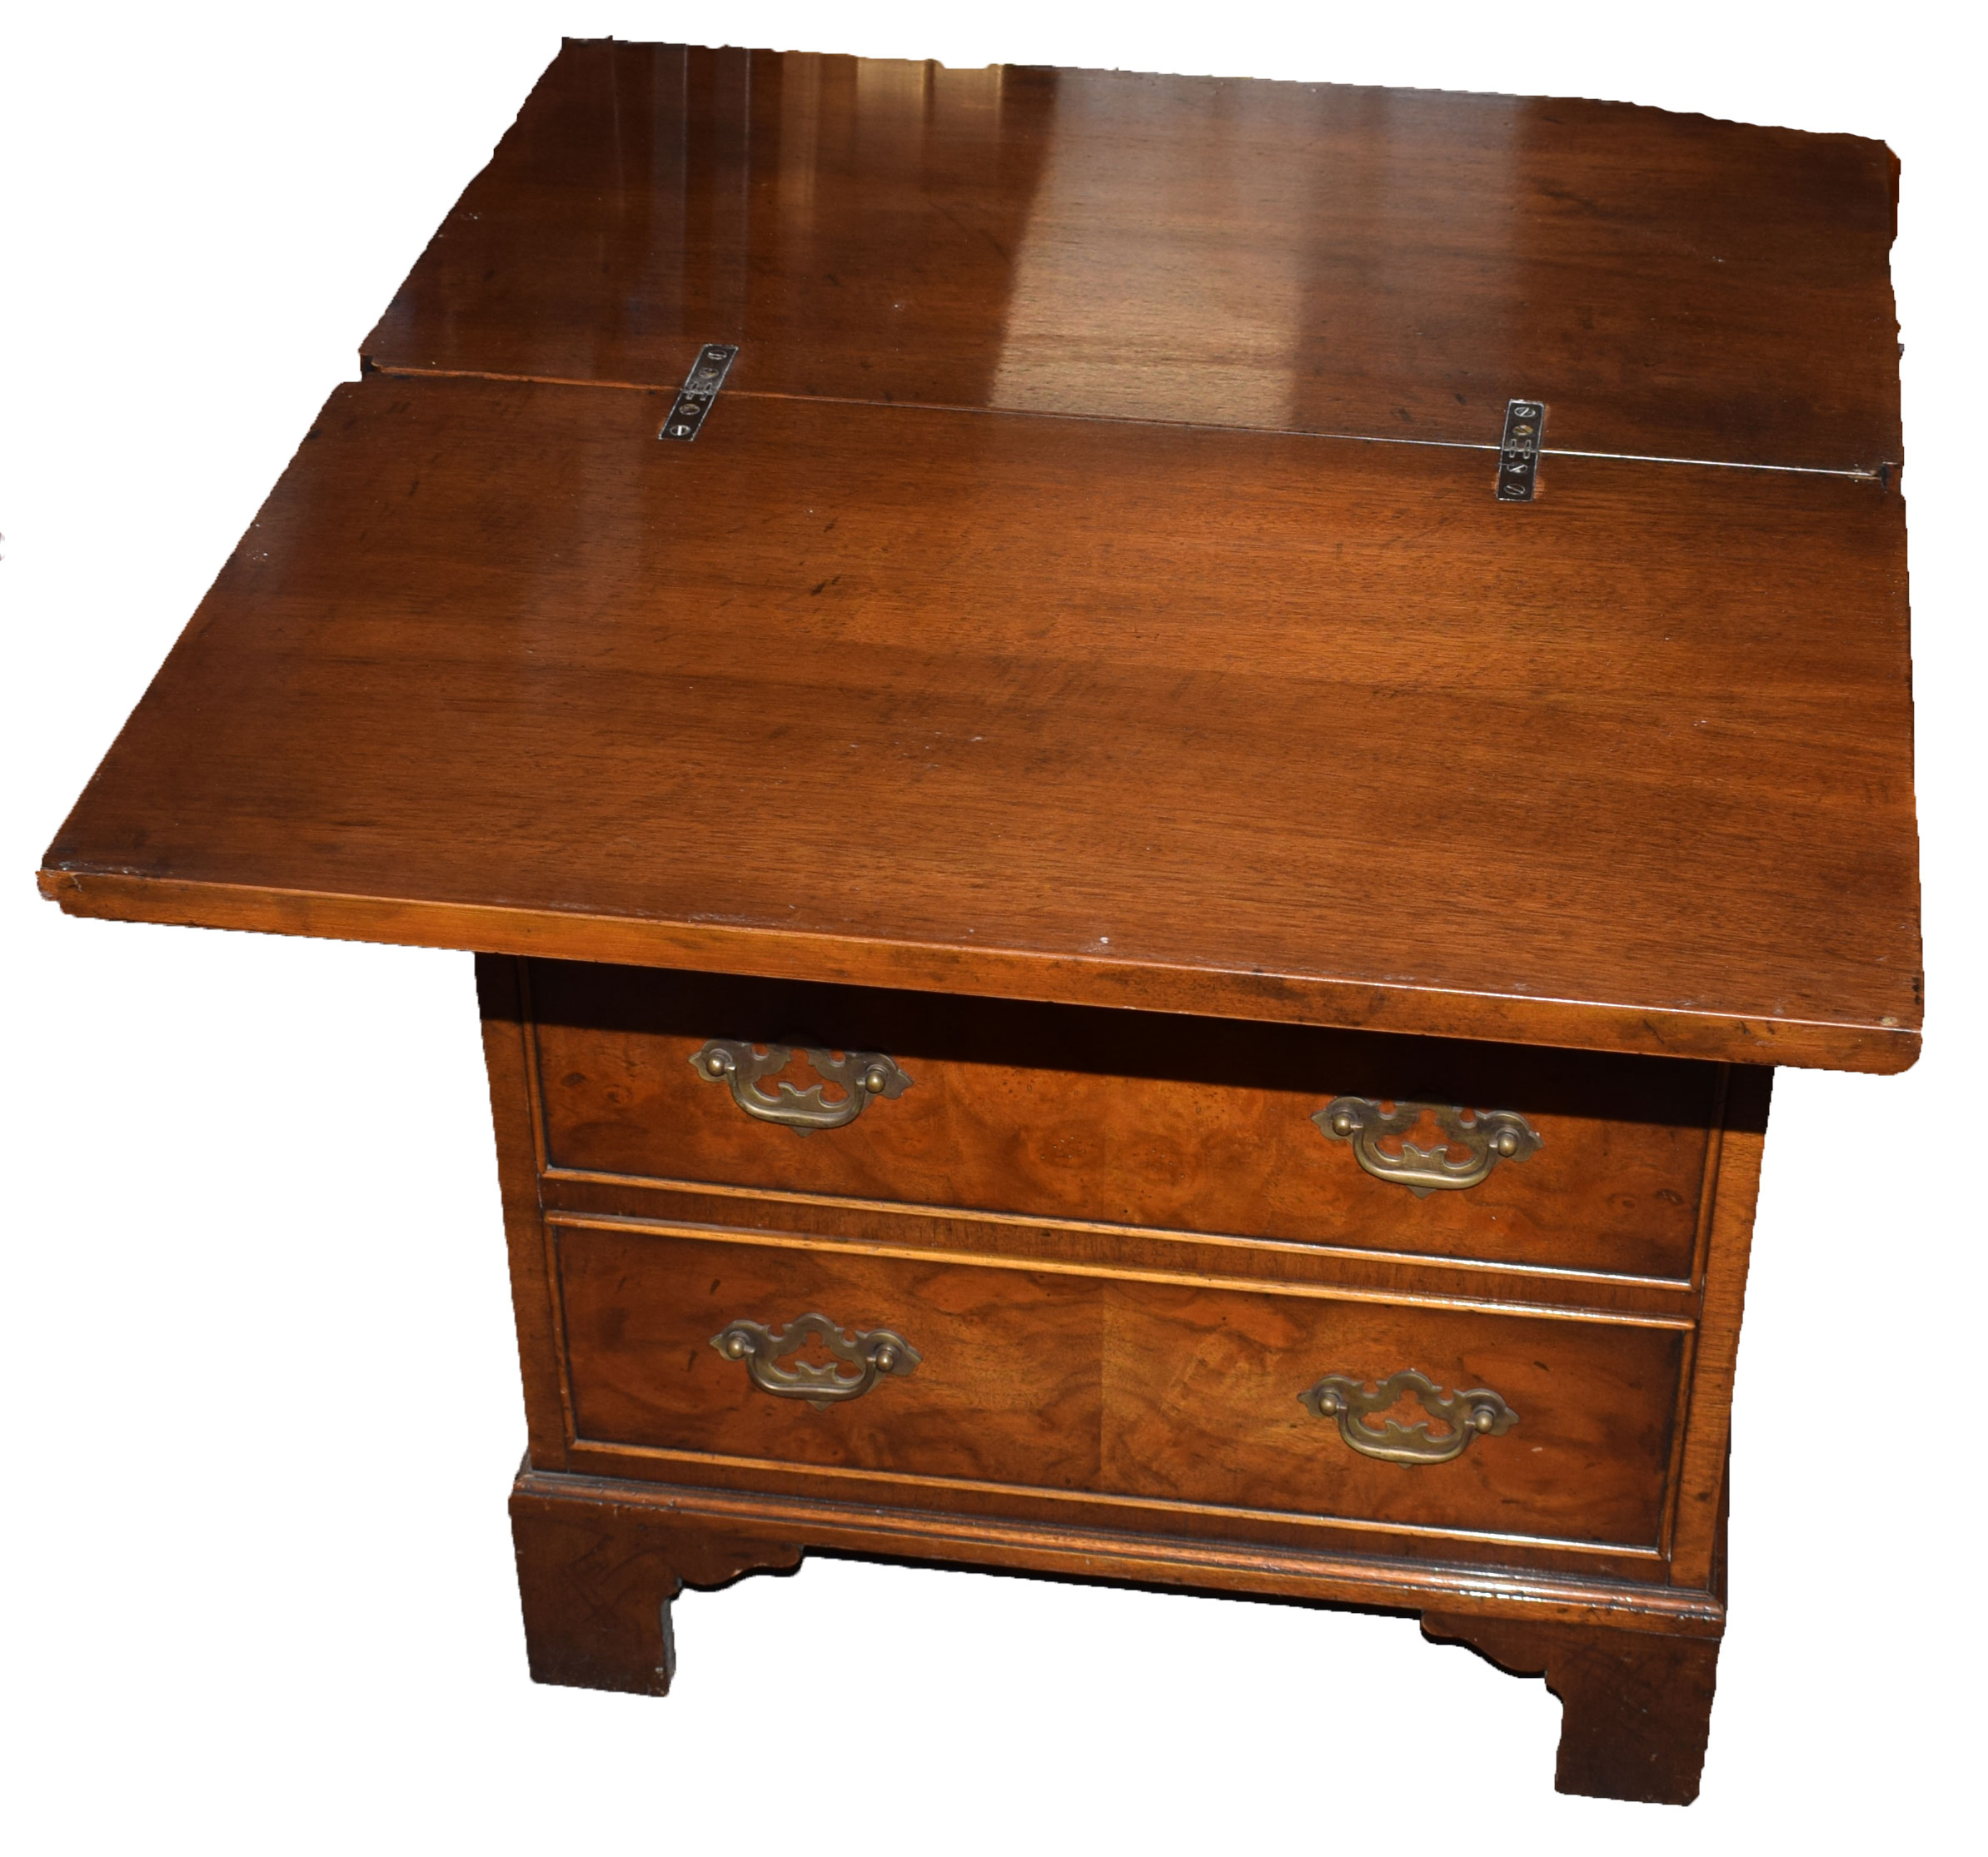 Early Georgian style burr walnut veneered small chest of four drawers with brass fittings, fold-over - Image 2 of 2